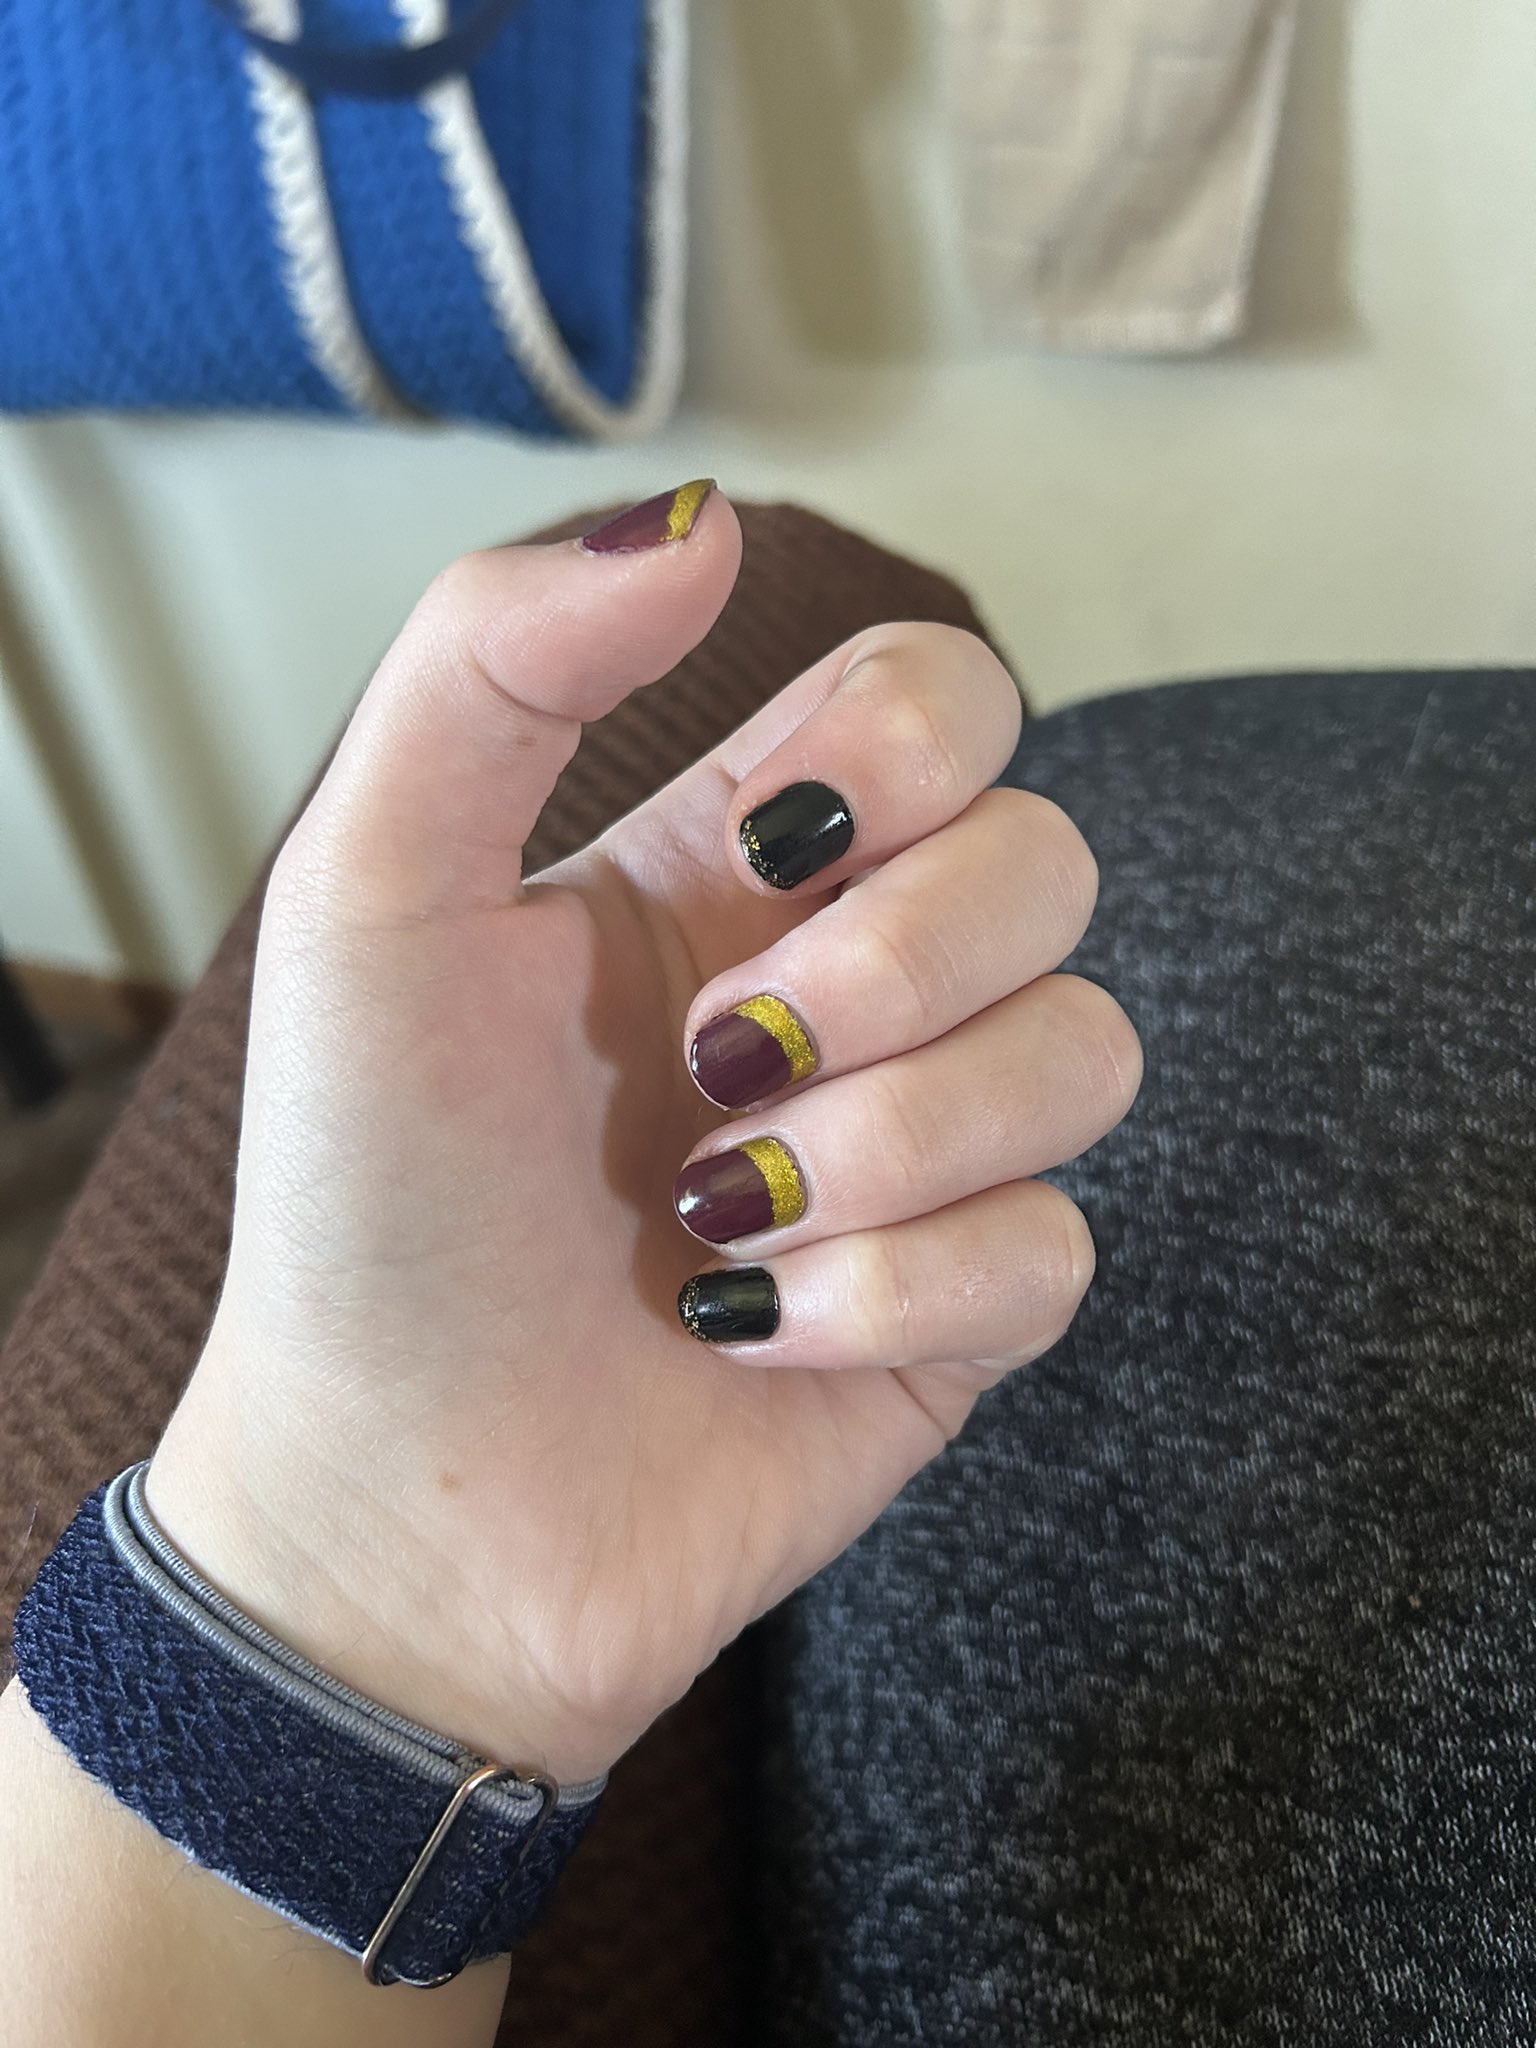 Had to cut my nails short since I just started learning the guitar! It was  a bittersweet moment I must say. Thankful for stickers 💕 lol : r/Nails